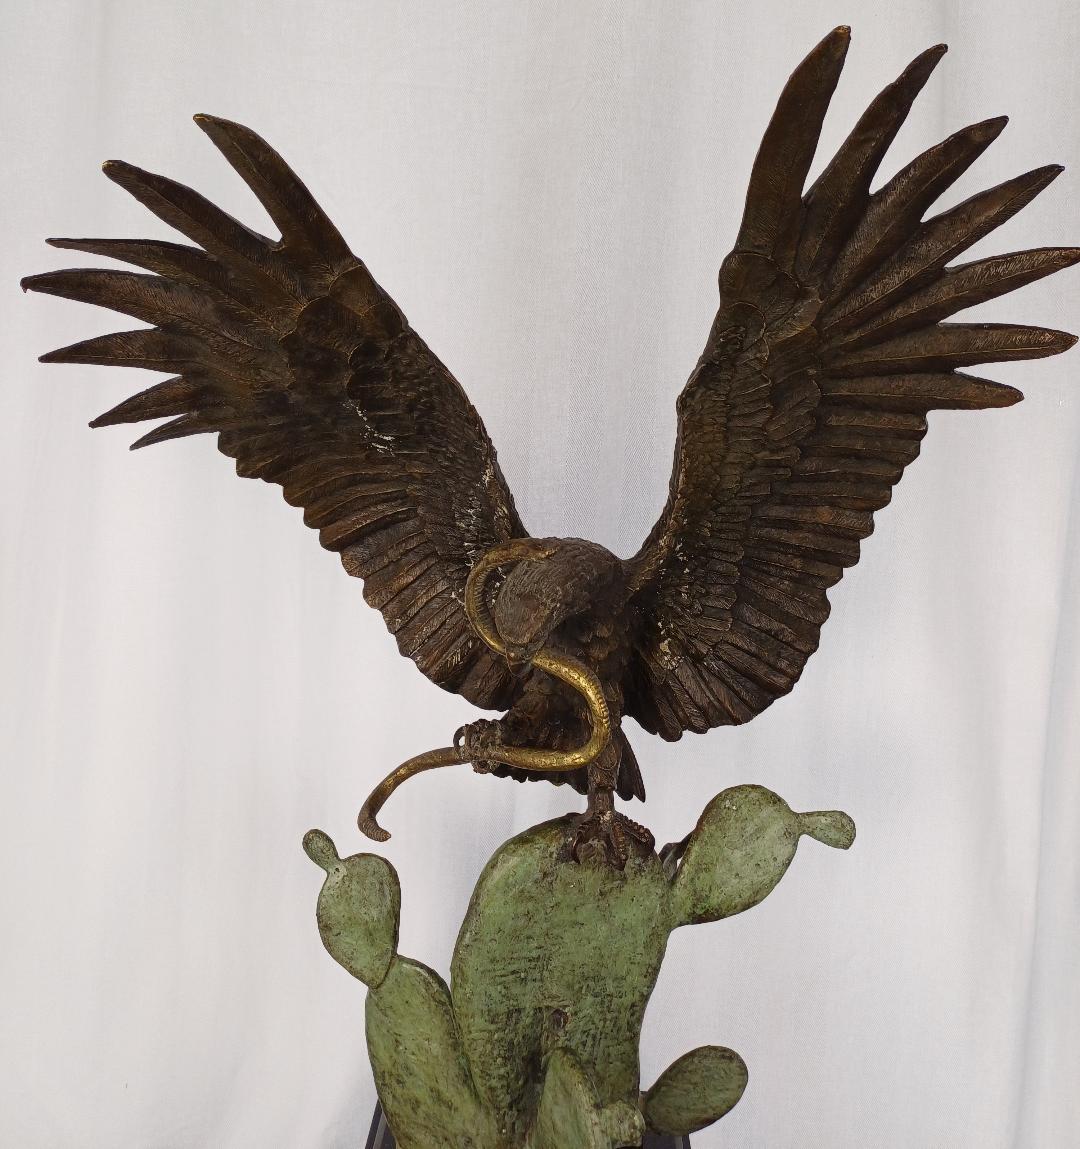 Impressive large bronze of an eagle holding a serpent on a cactus (national symbole of Mexico). Number 2 out of 5 examples made by Alberto Estrada. Bronze on a black marble base.